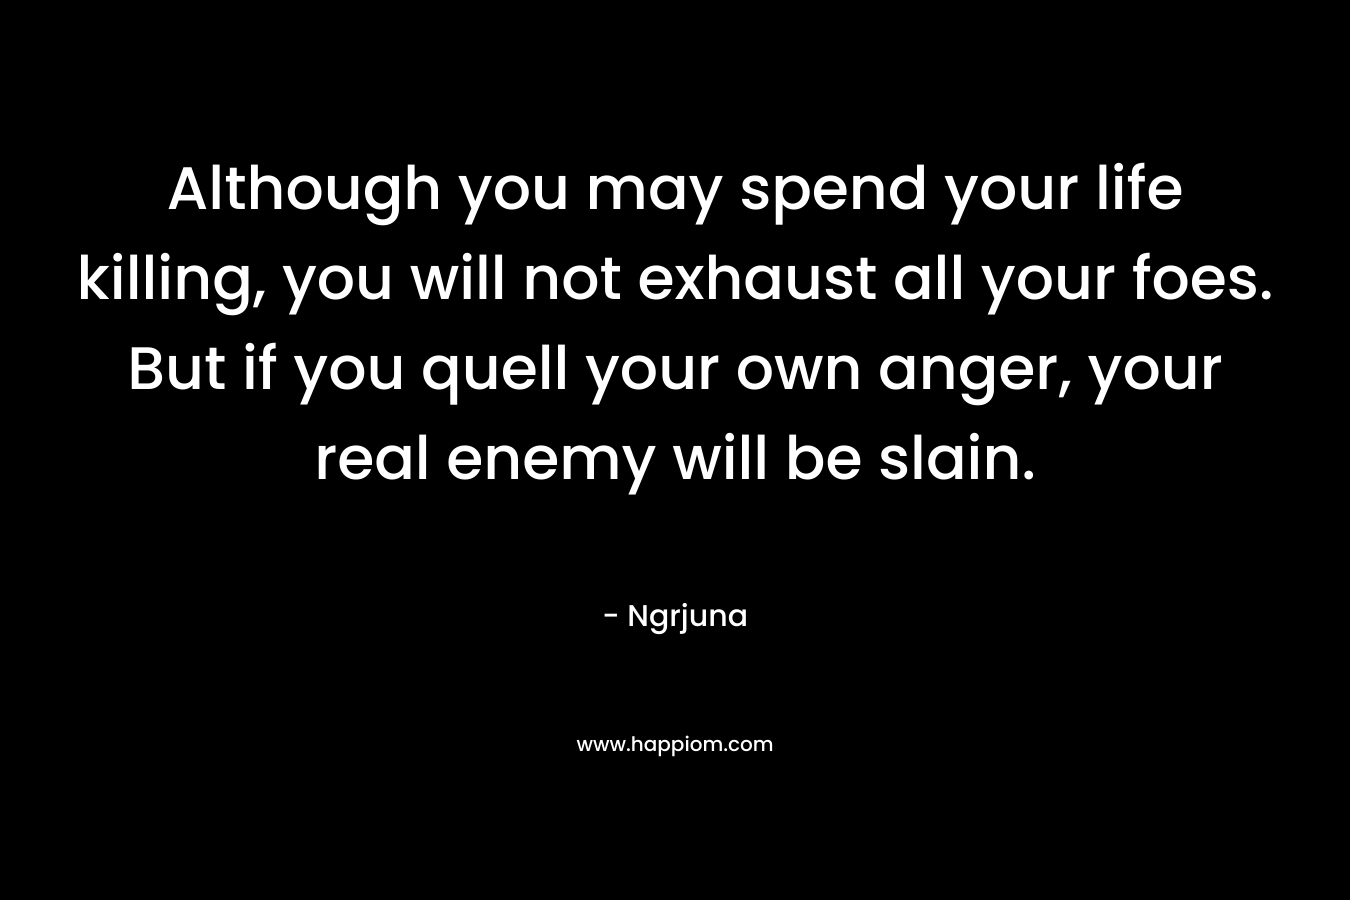 Although you may spend your life killing, you will not exhaust all your foes. But if you quell your own anger, your real enemy will be slain.